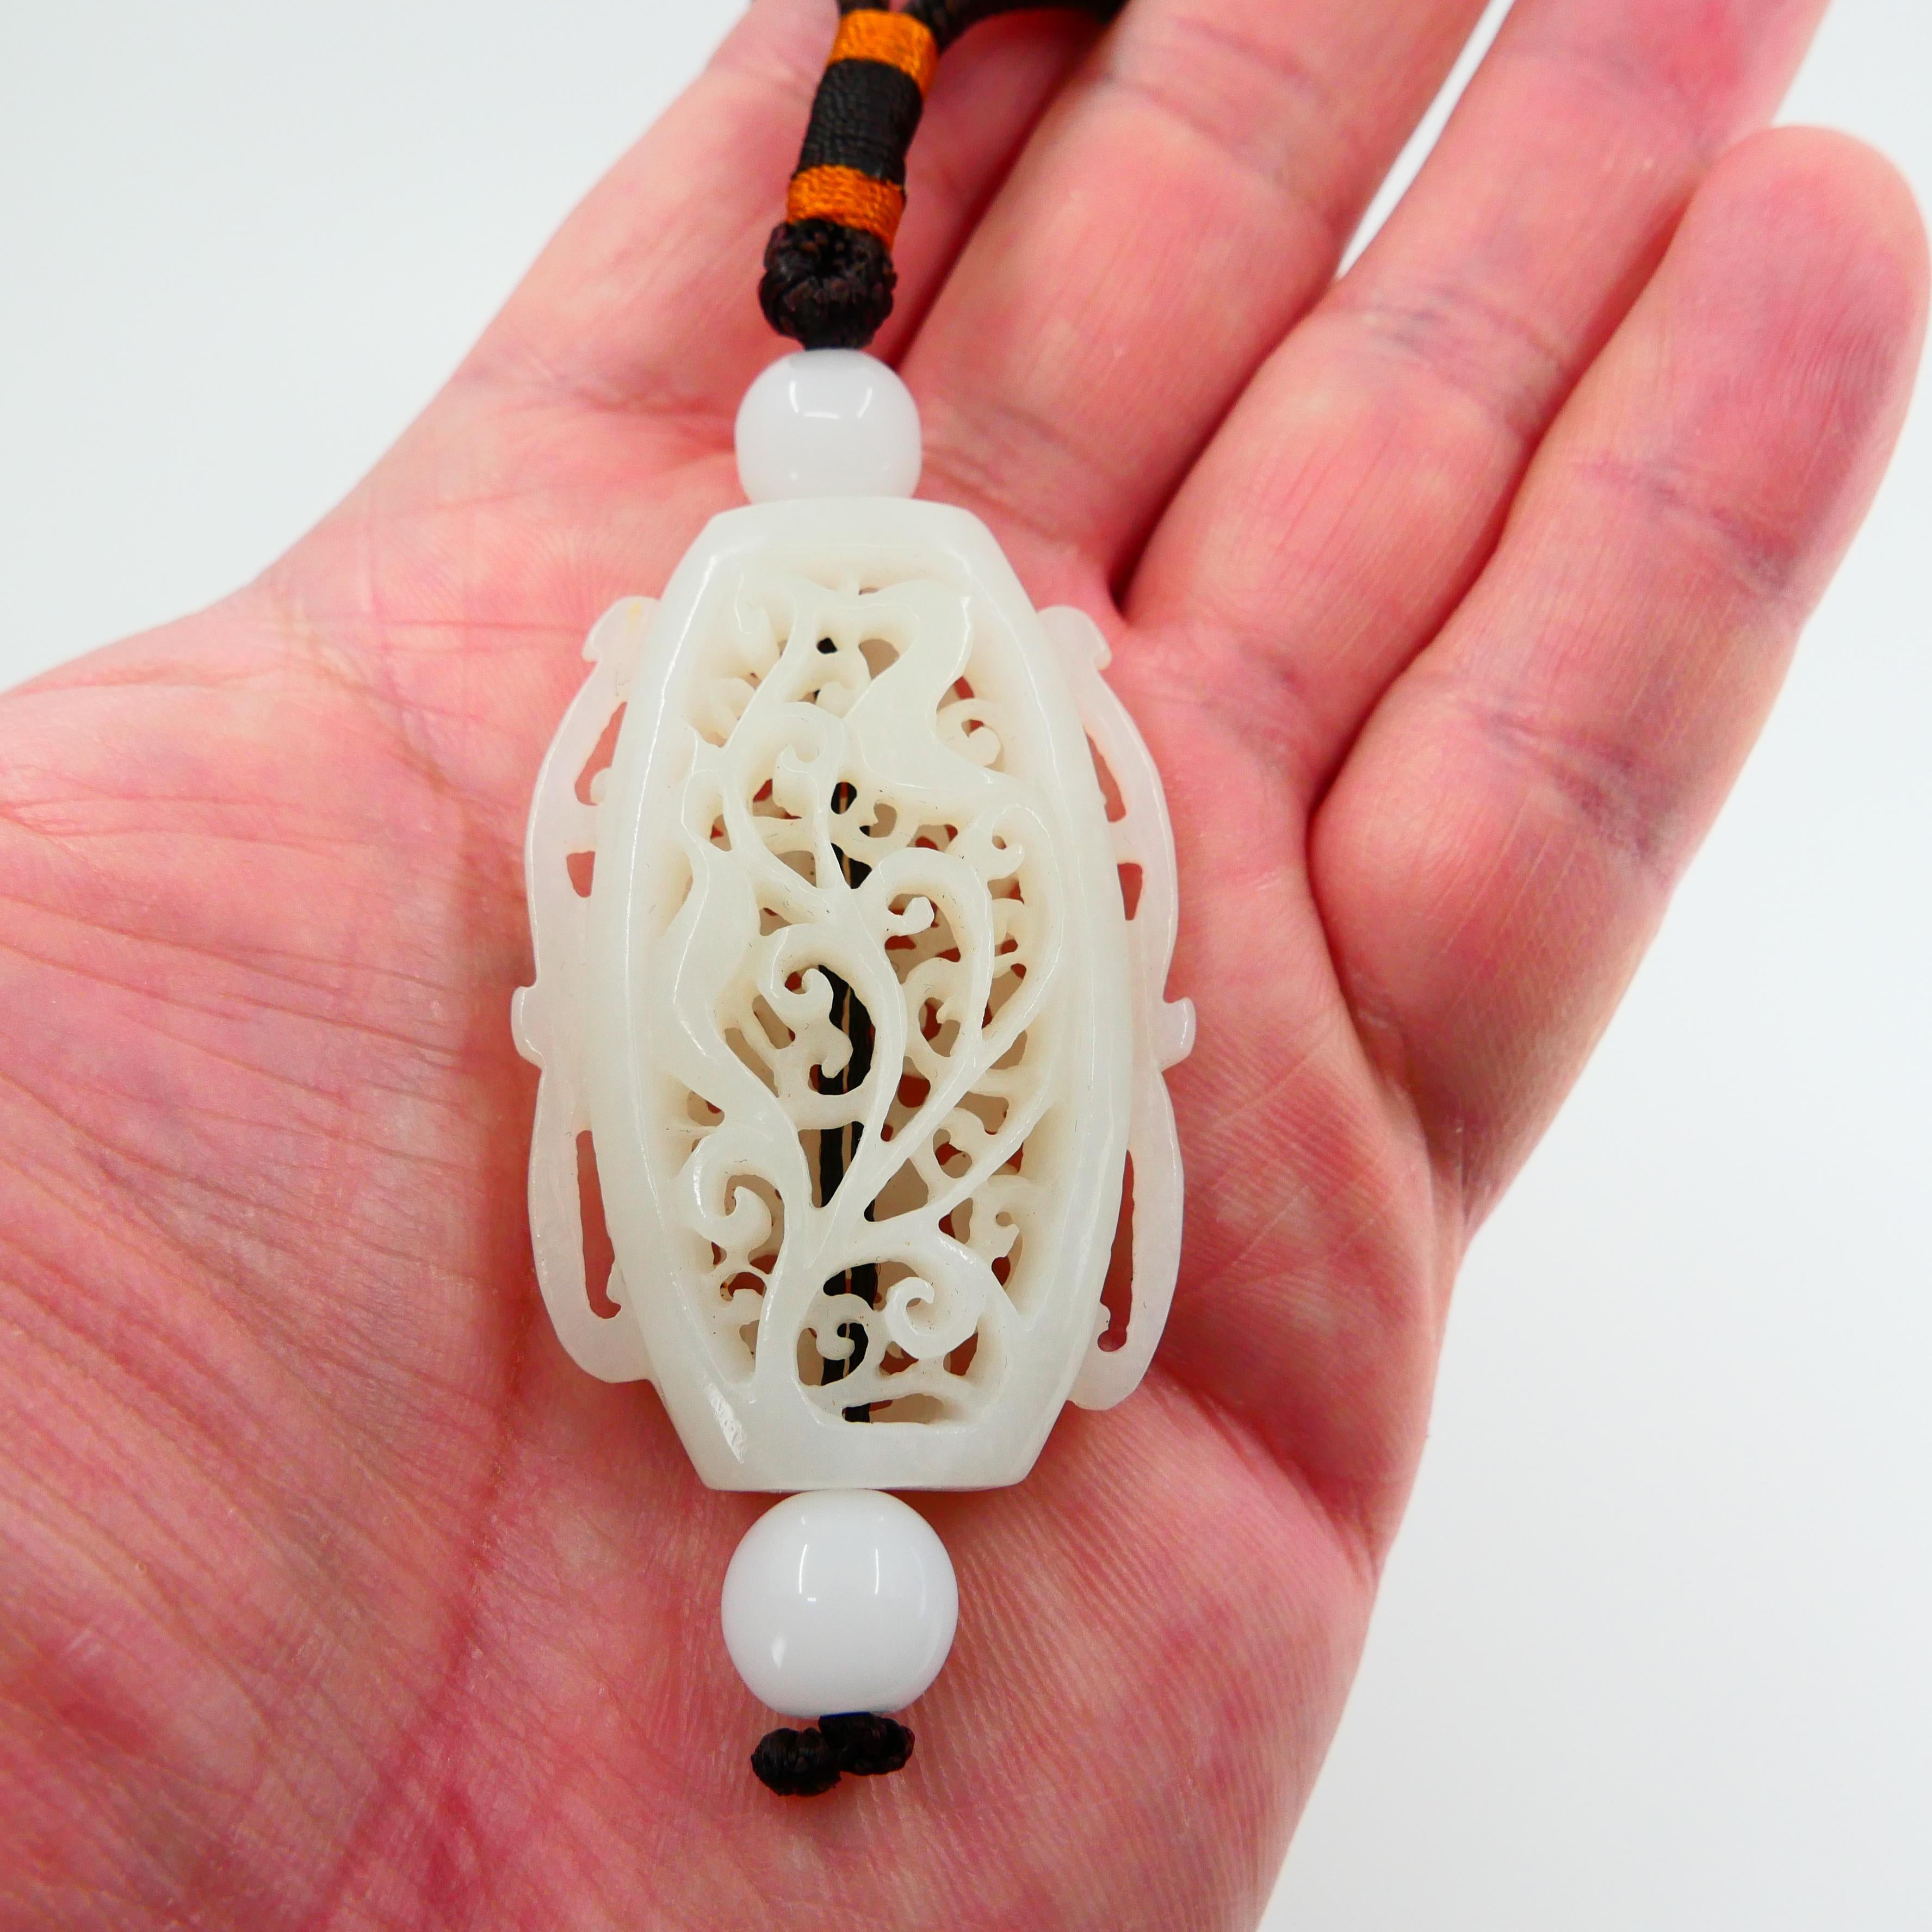 This is an unique piece for your consideration. The hand held decoration is certified natural nephrite jade. It is currently just an handheld decoration, however, can be converted into a pendant with a a traditional chinese cord for a different use.